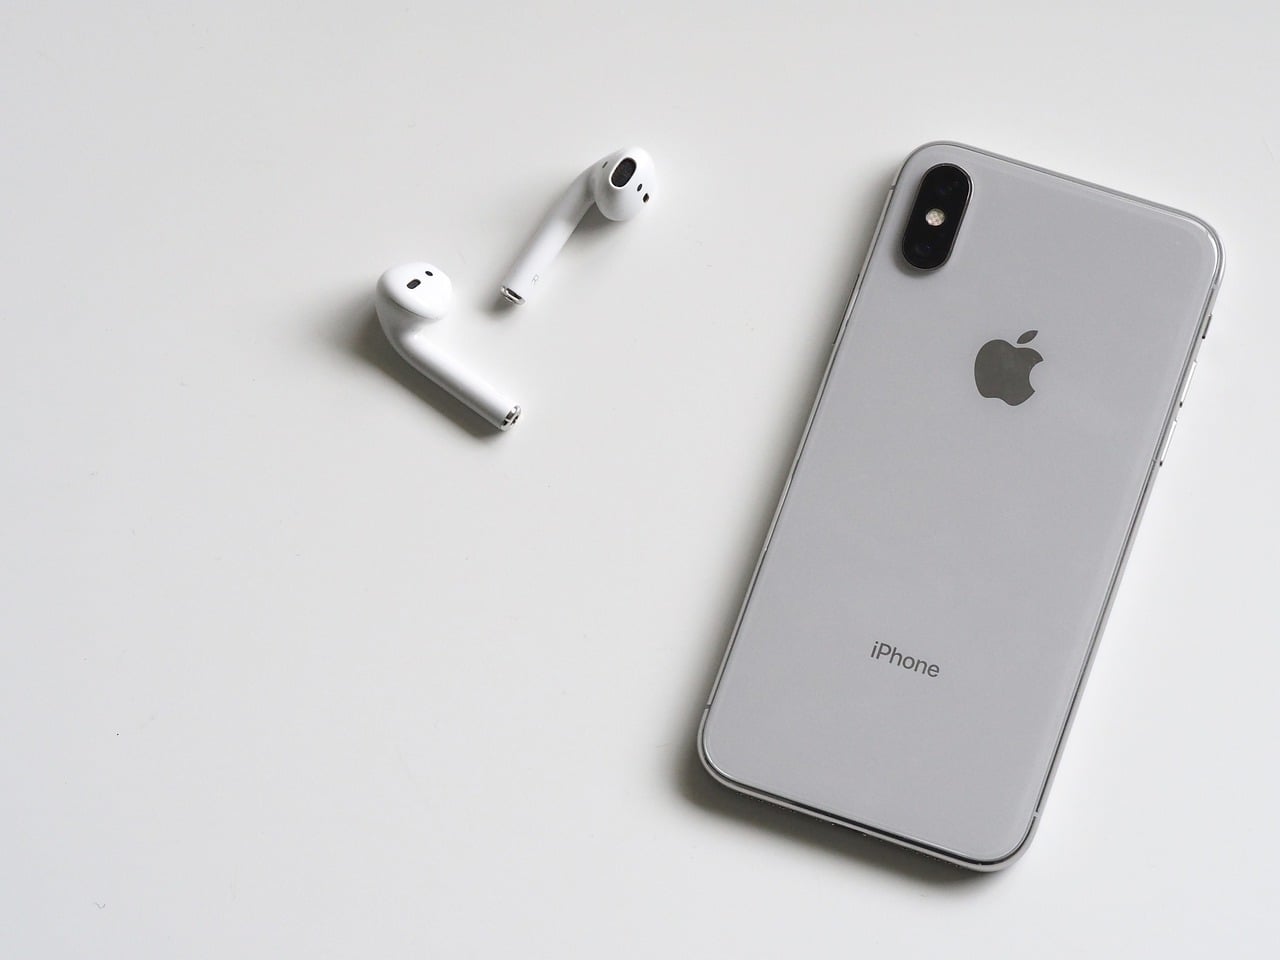 Waterproof AirPods 3 With Noise-Cancellation Could Launch This Year